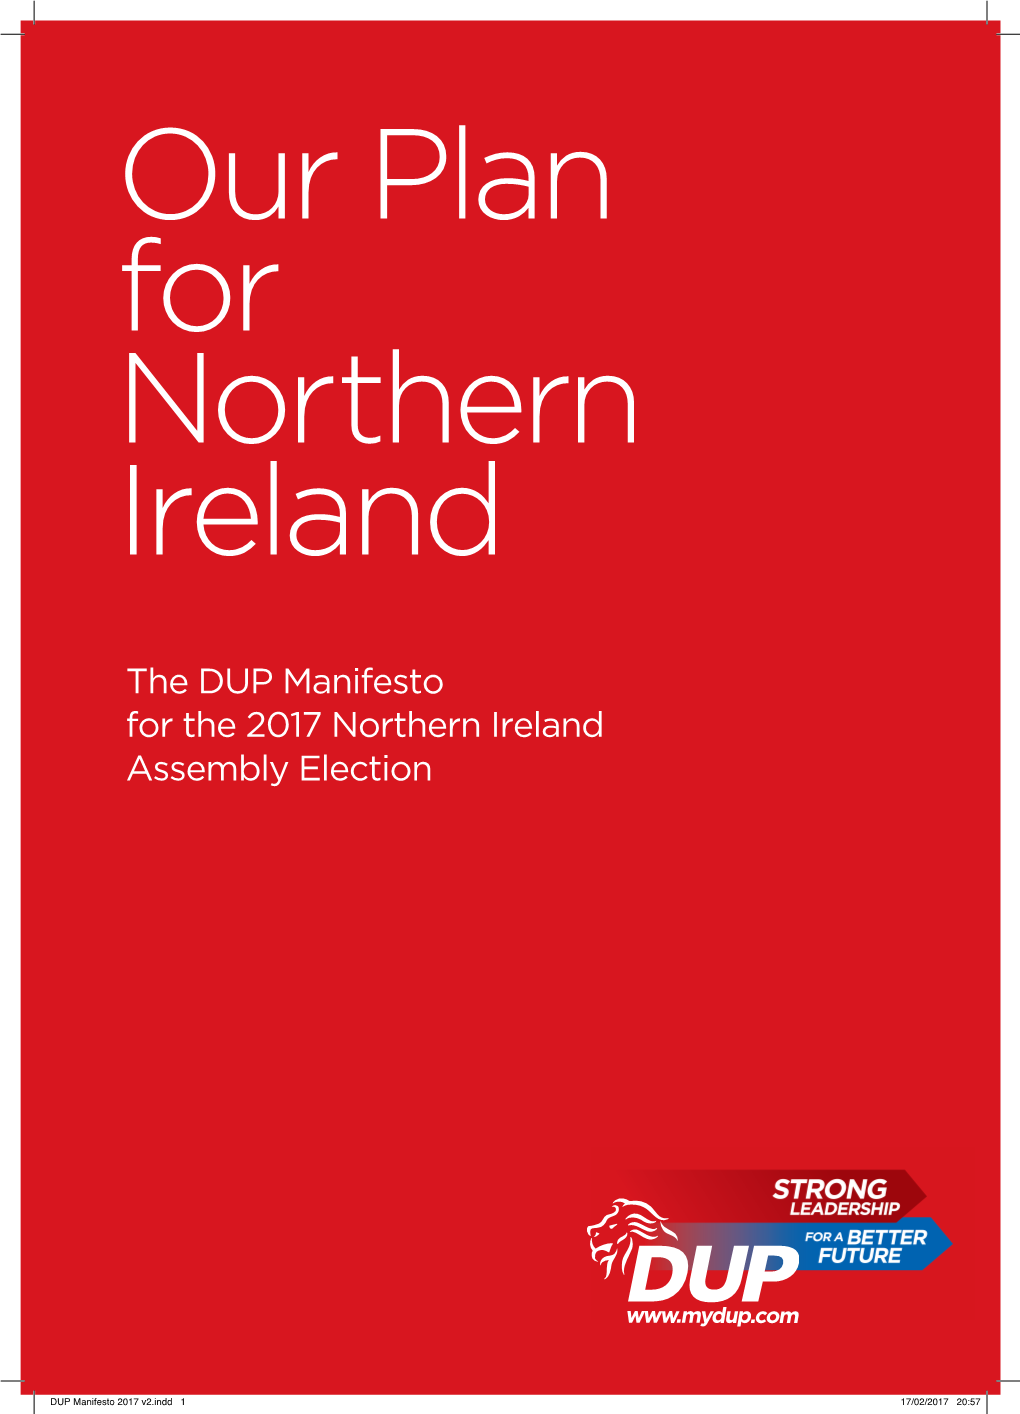 The DUP Manifesto for the 2017 Northern Ireland Assembly Election